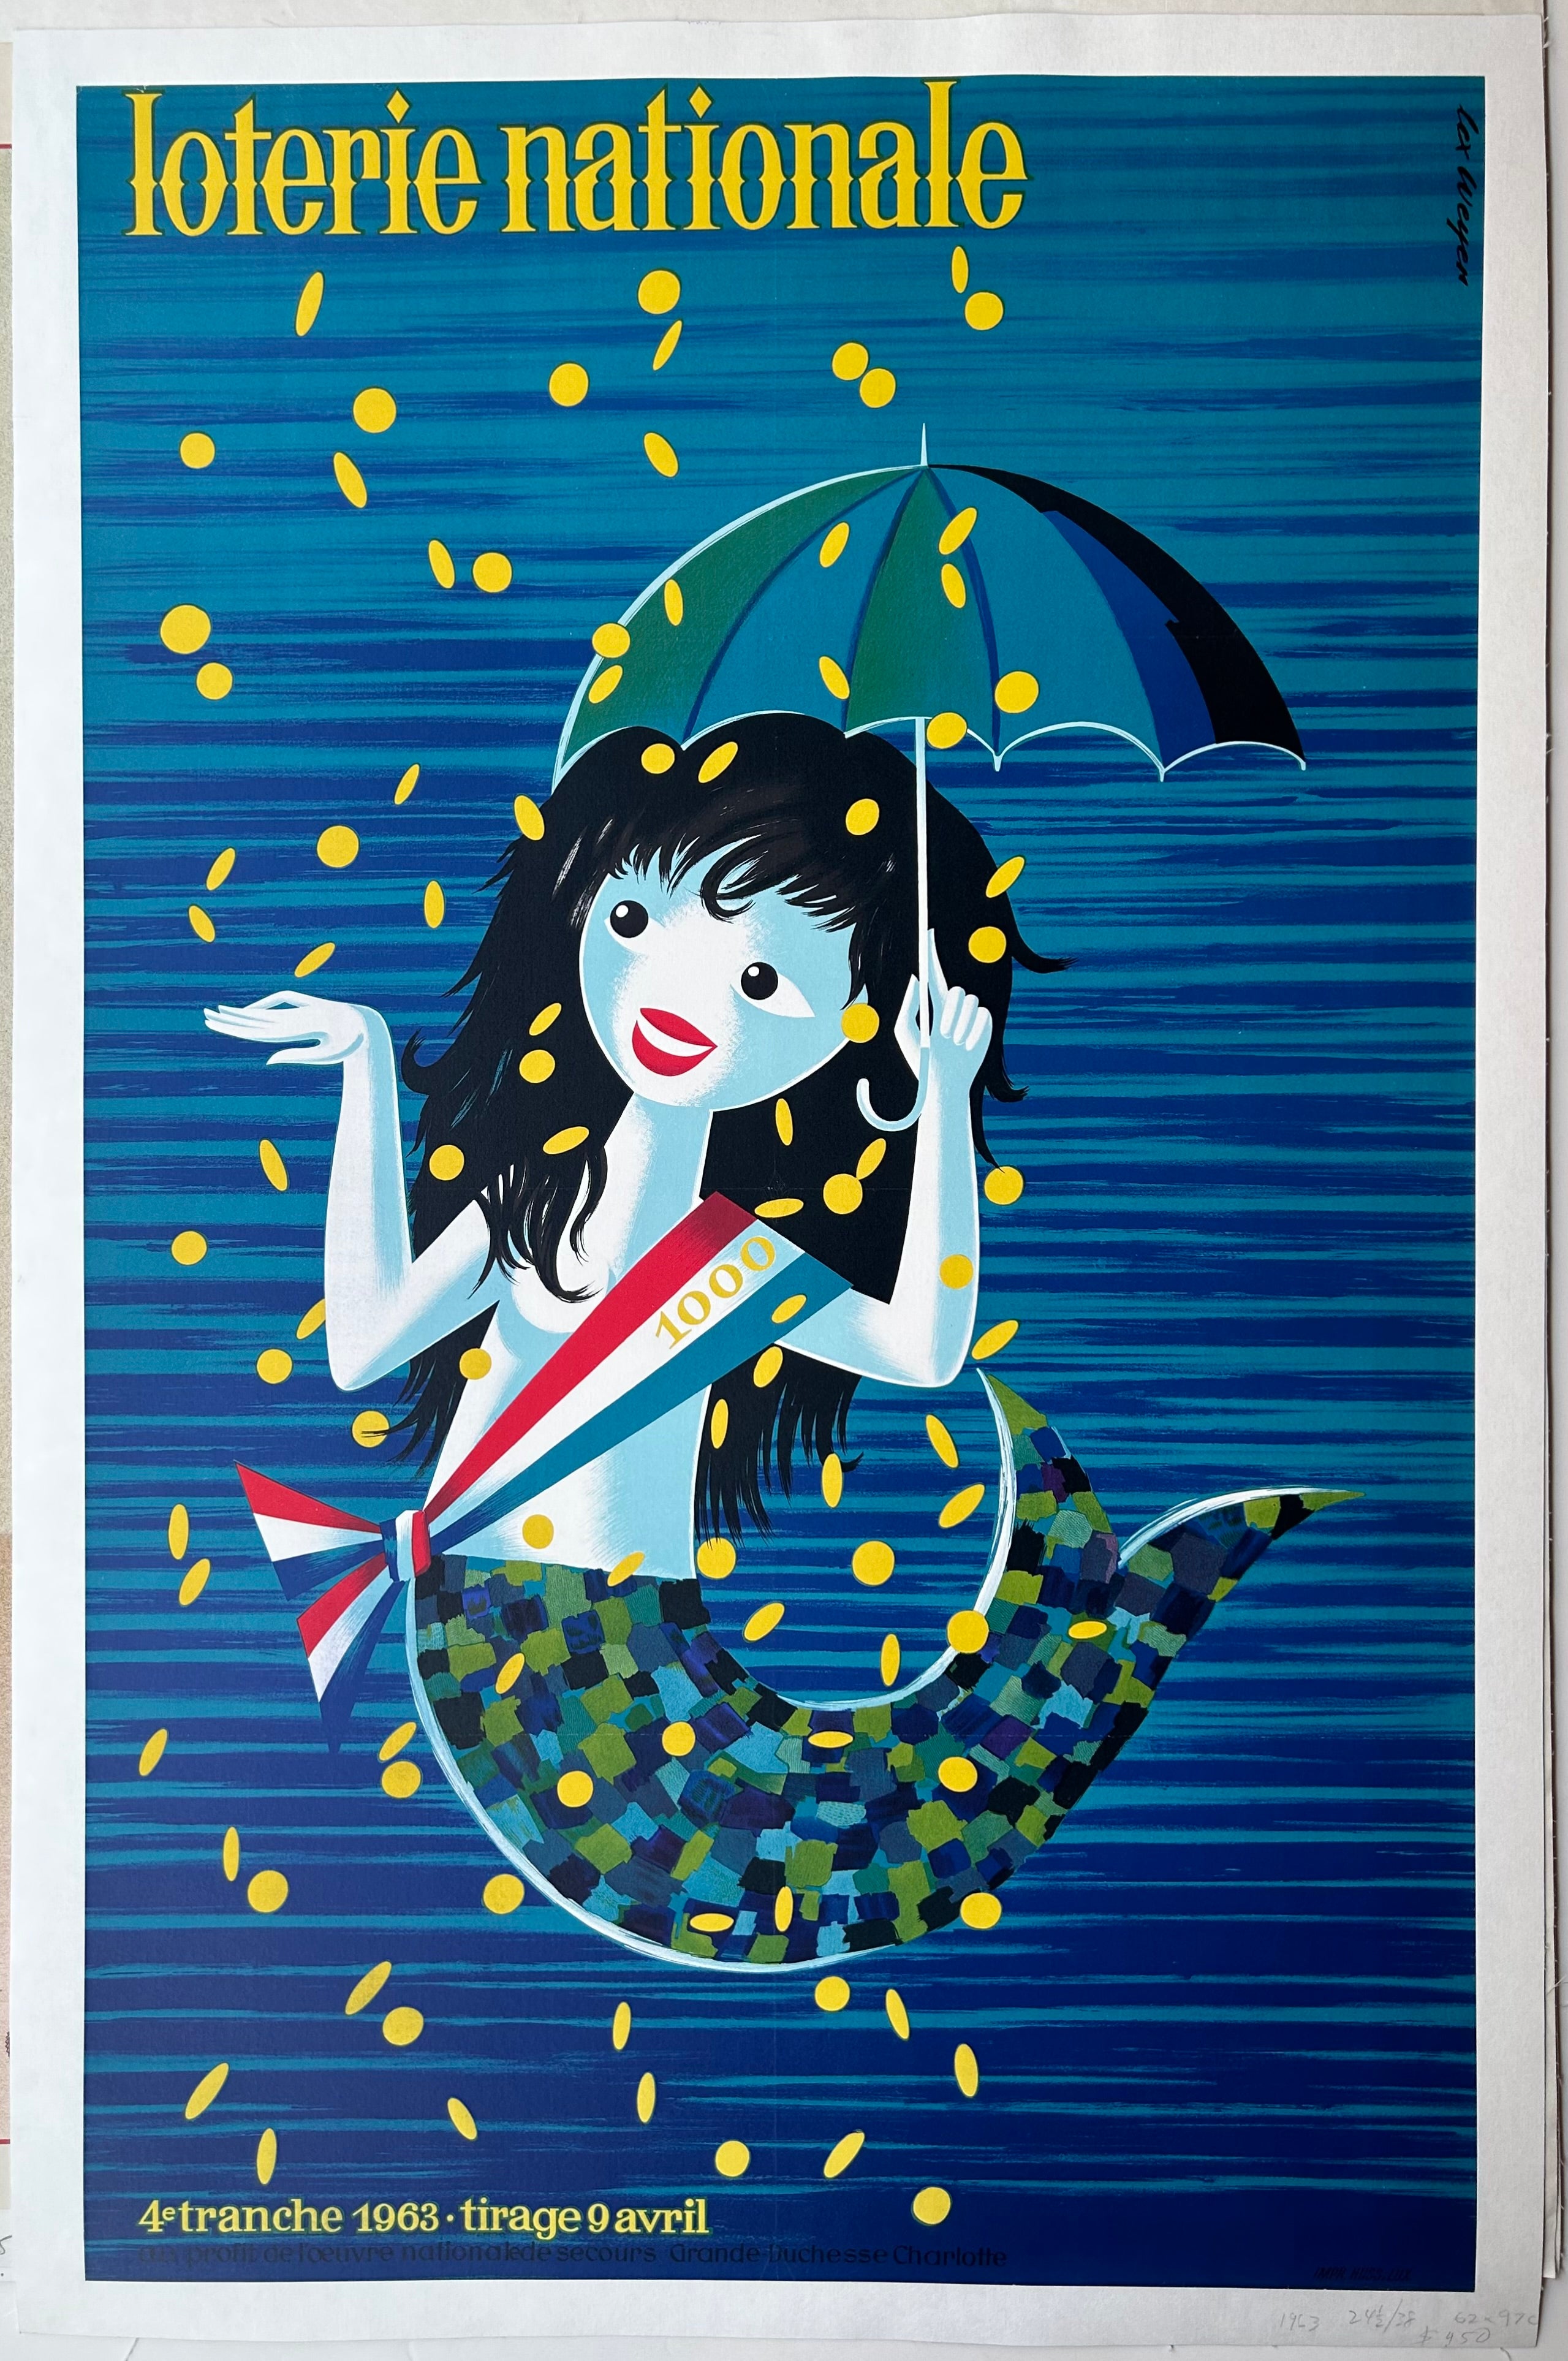 Loterie Nationale Mermaid Poster ✓